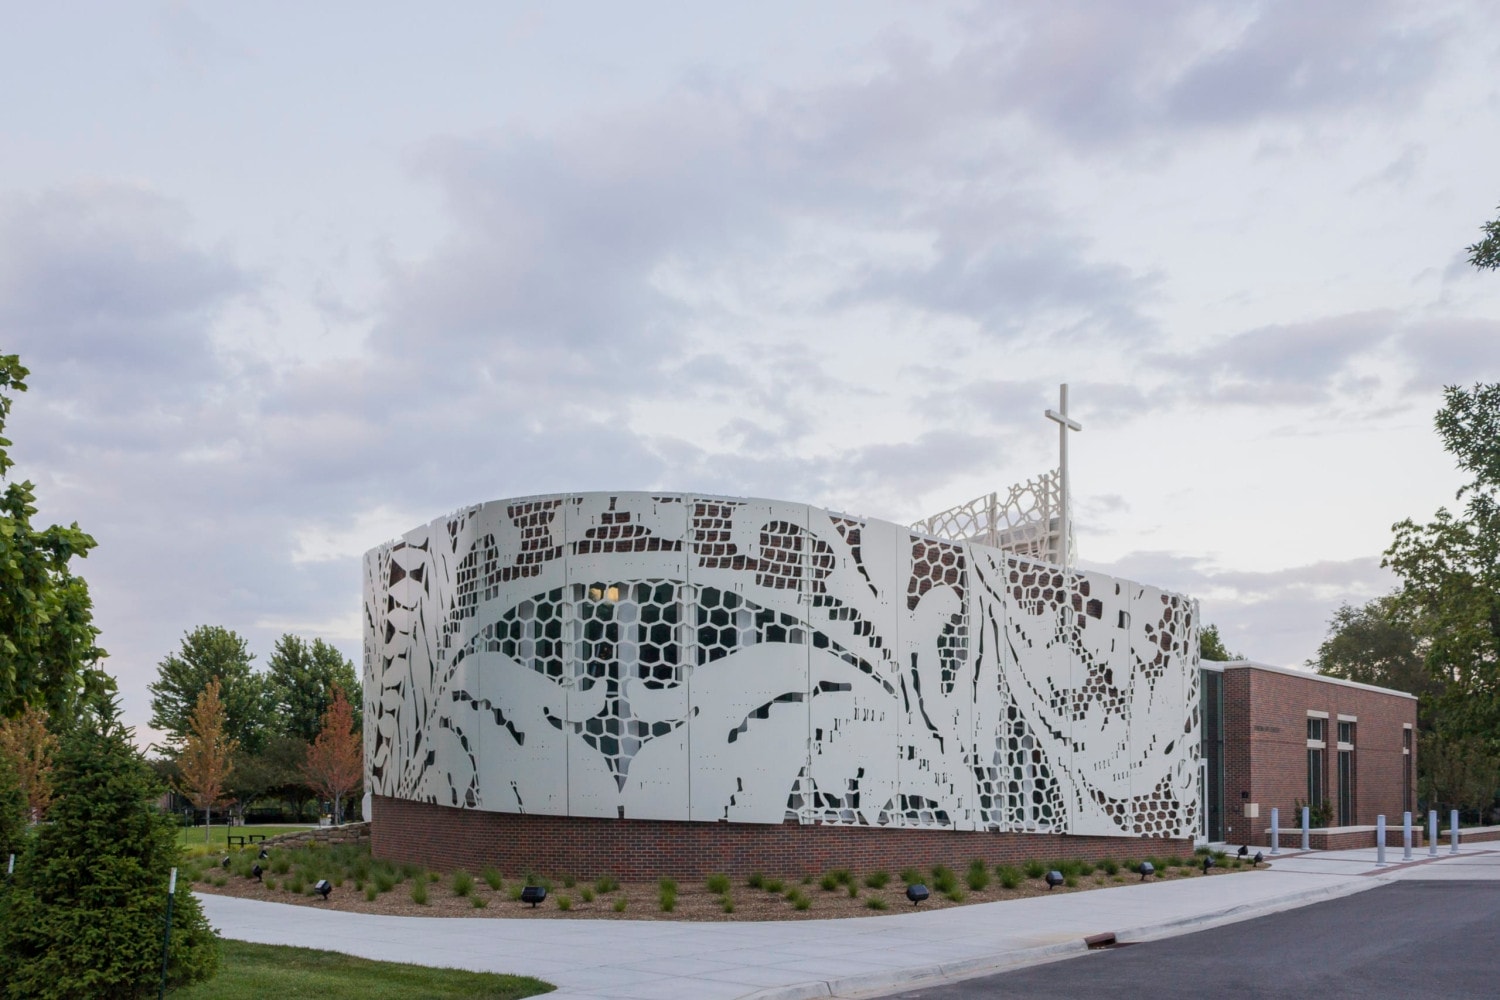 Lace patterns cut into plate aluminum and rolled for the curving facade at St. Teresa's Academy.